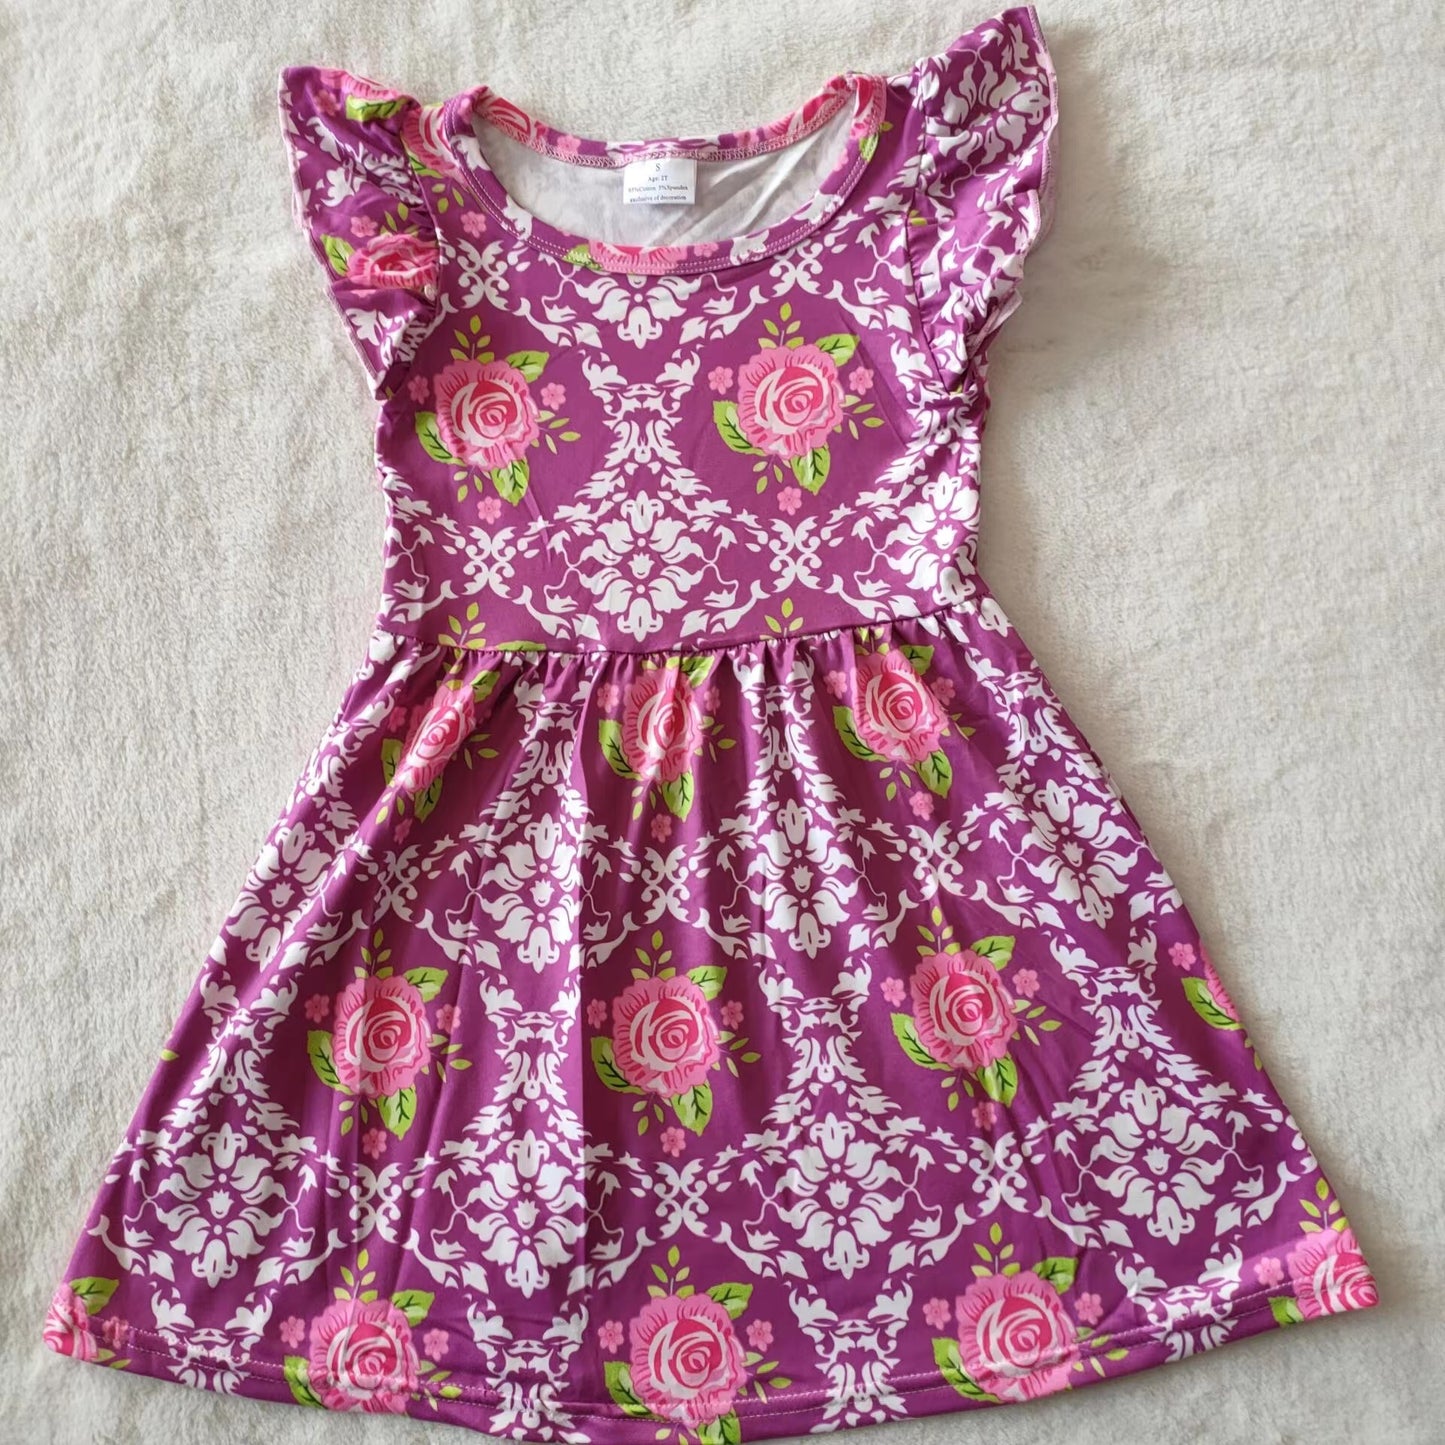 Baby girls purple floral pearl dresses